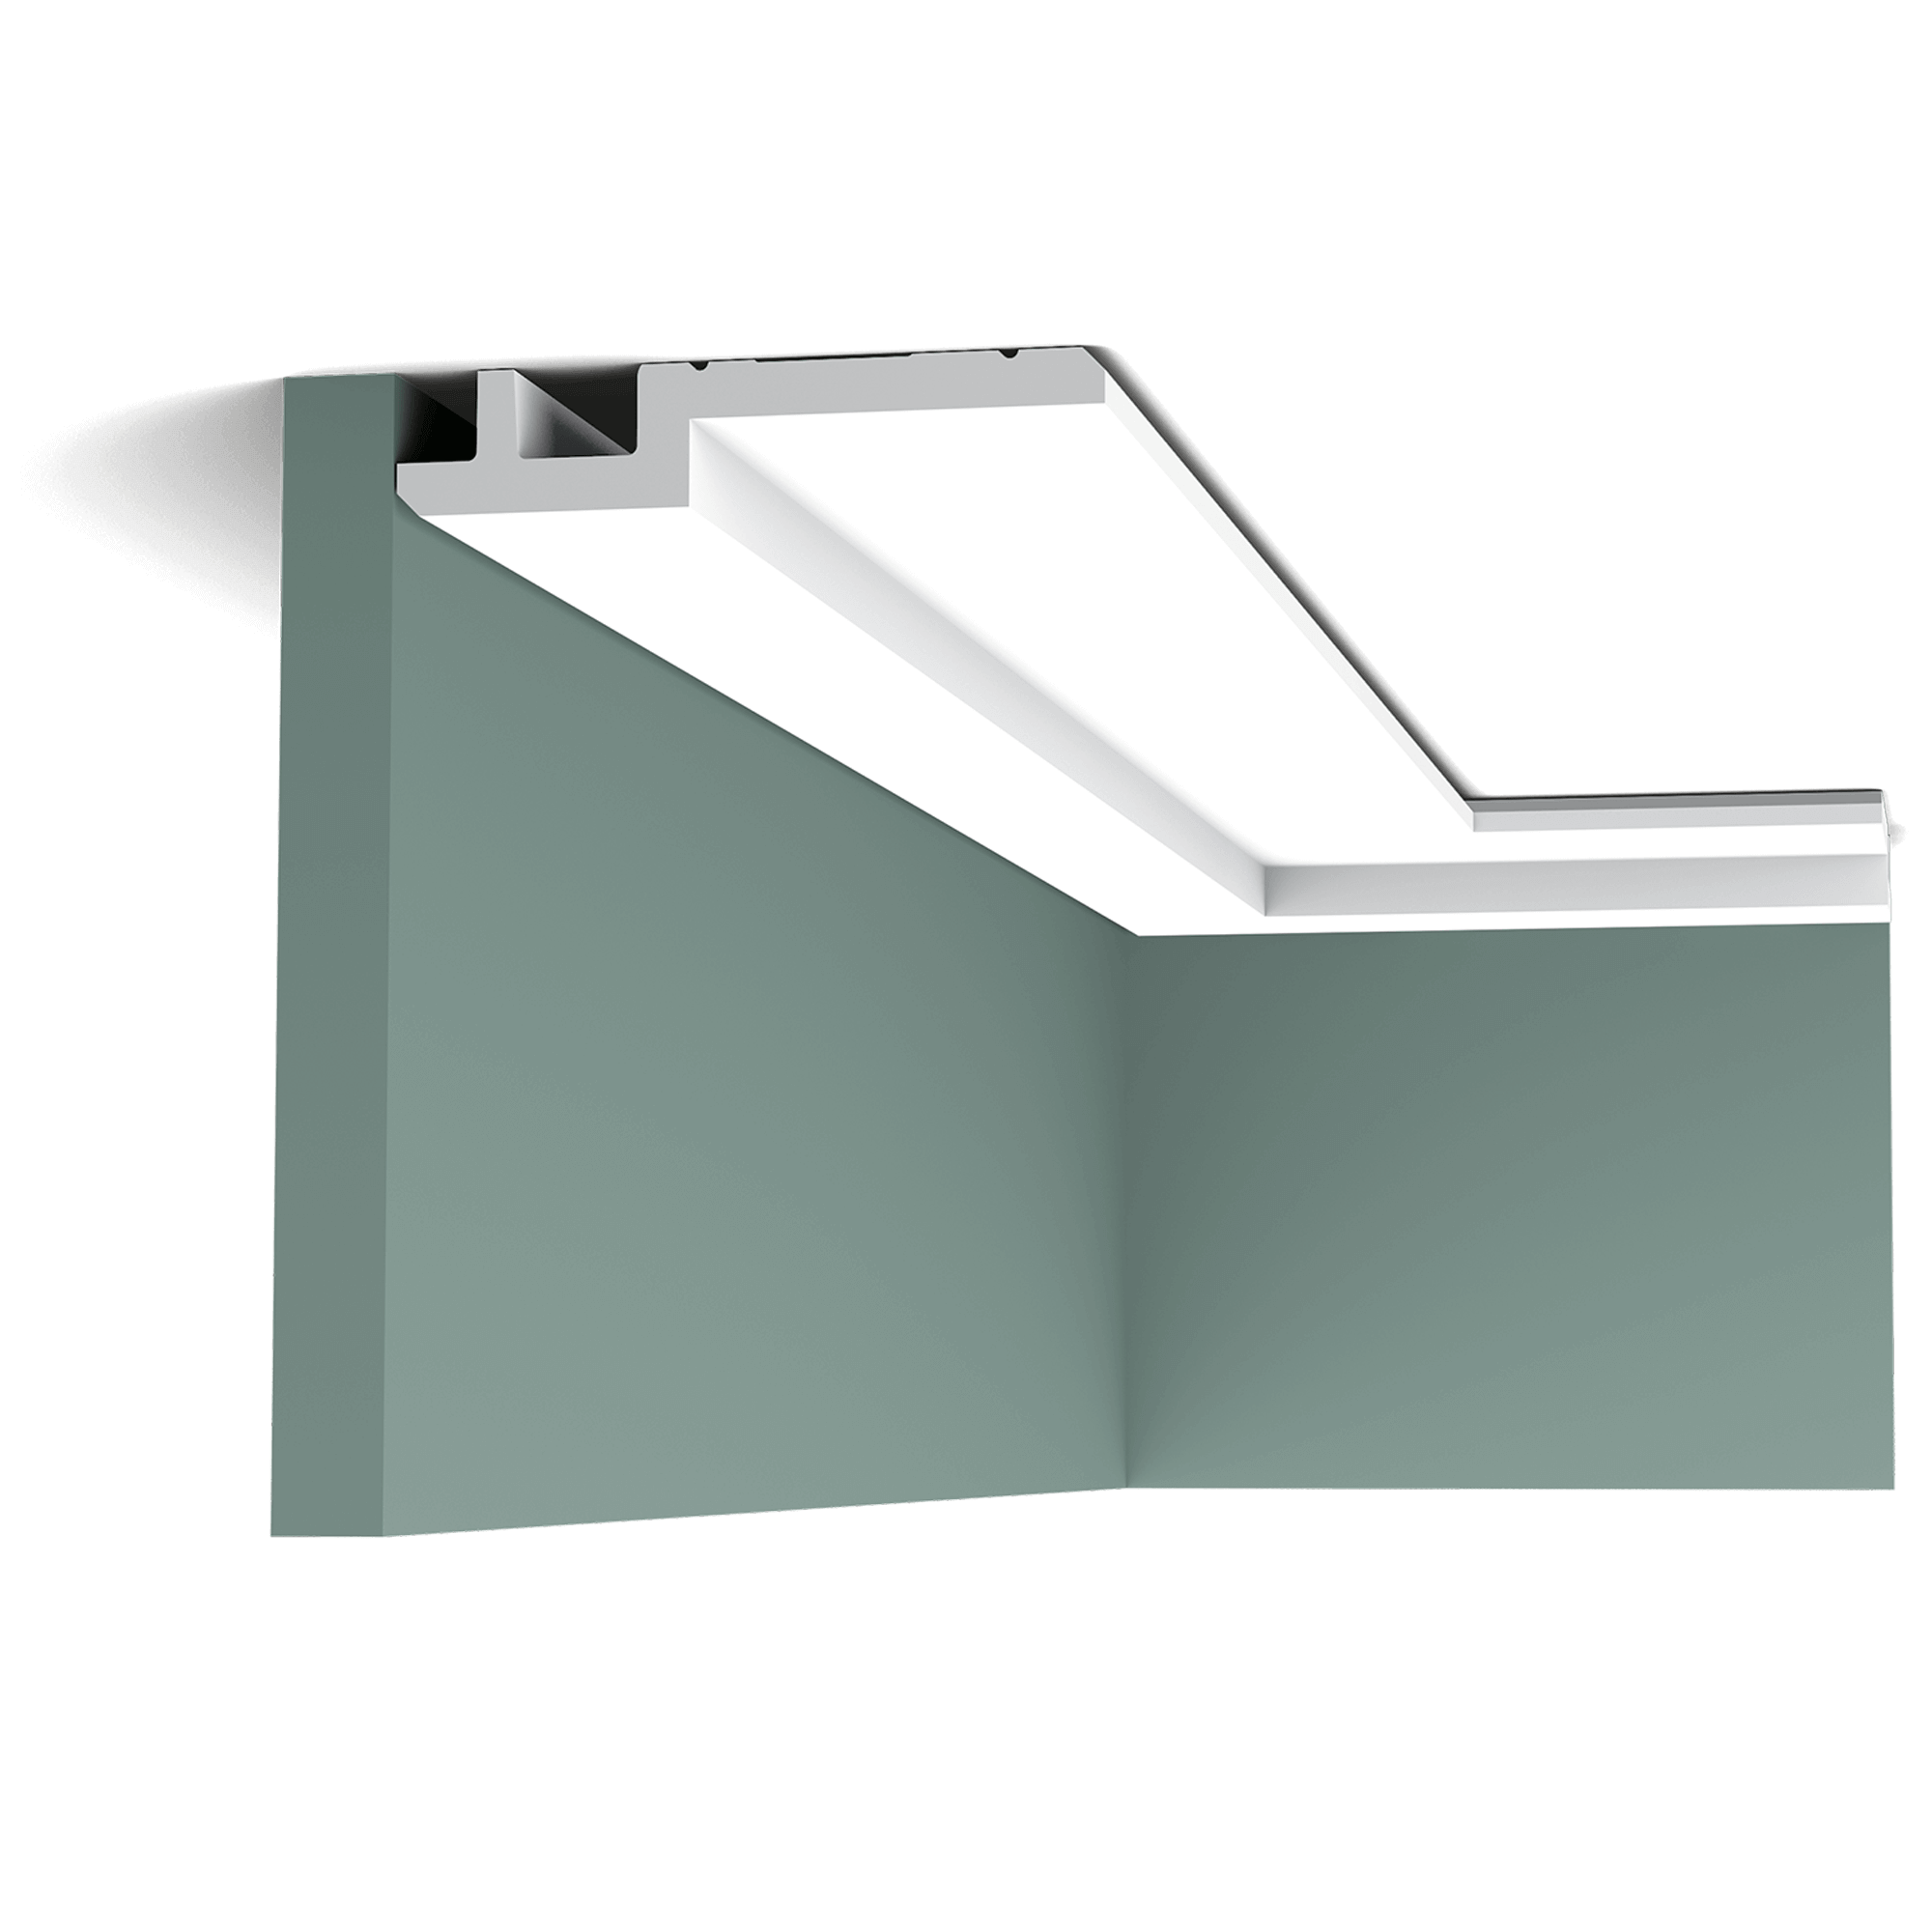 c395 cornice moulding 11e7 A clean, modern profile from the Steps range. Here we fix the largest section to the ceiling, making the space seem wider. The angled corners above and below provide additional subtle shadow lines. Designed by Orio Tonini.